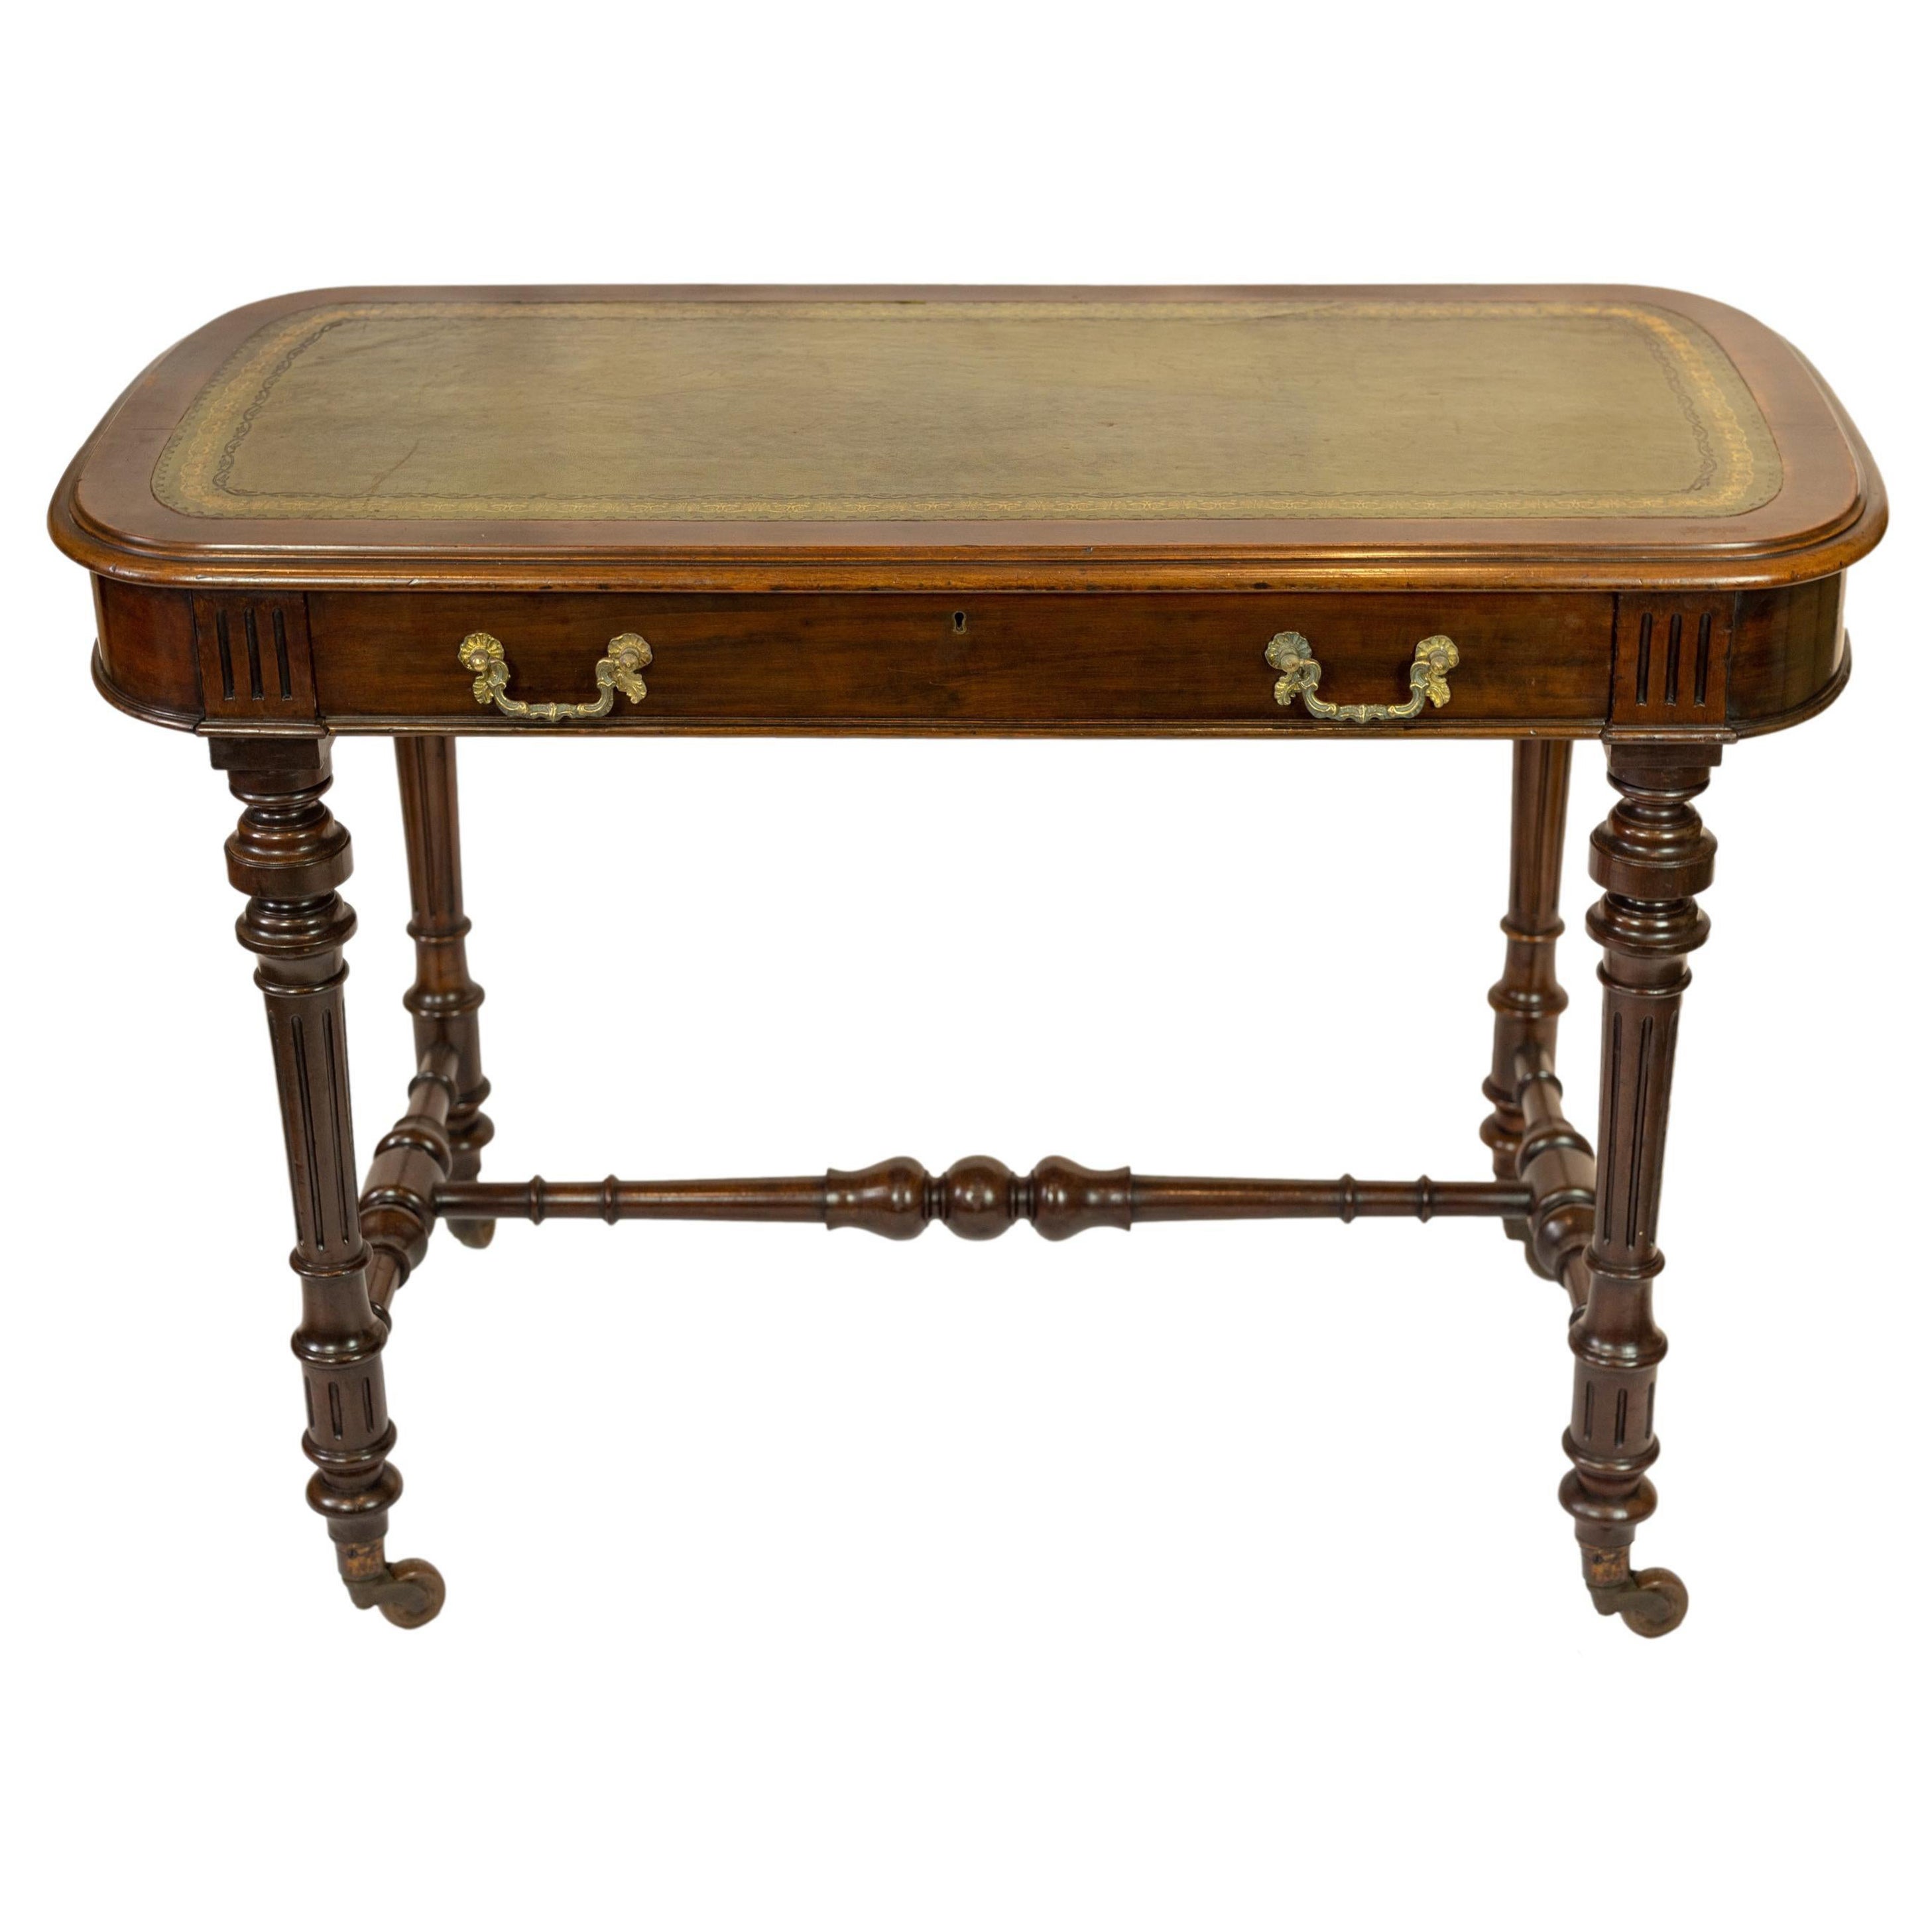 William IV Mahogany Writing Desk with Tooled Leather Top, English, ca. 1835